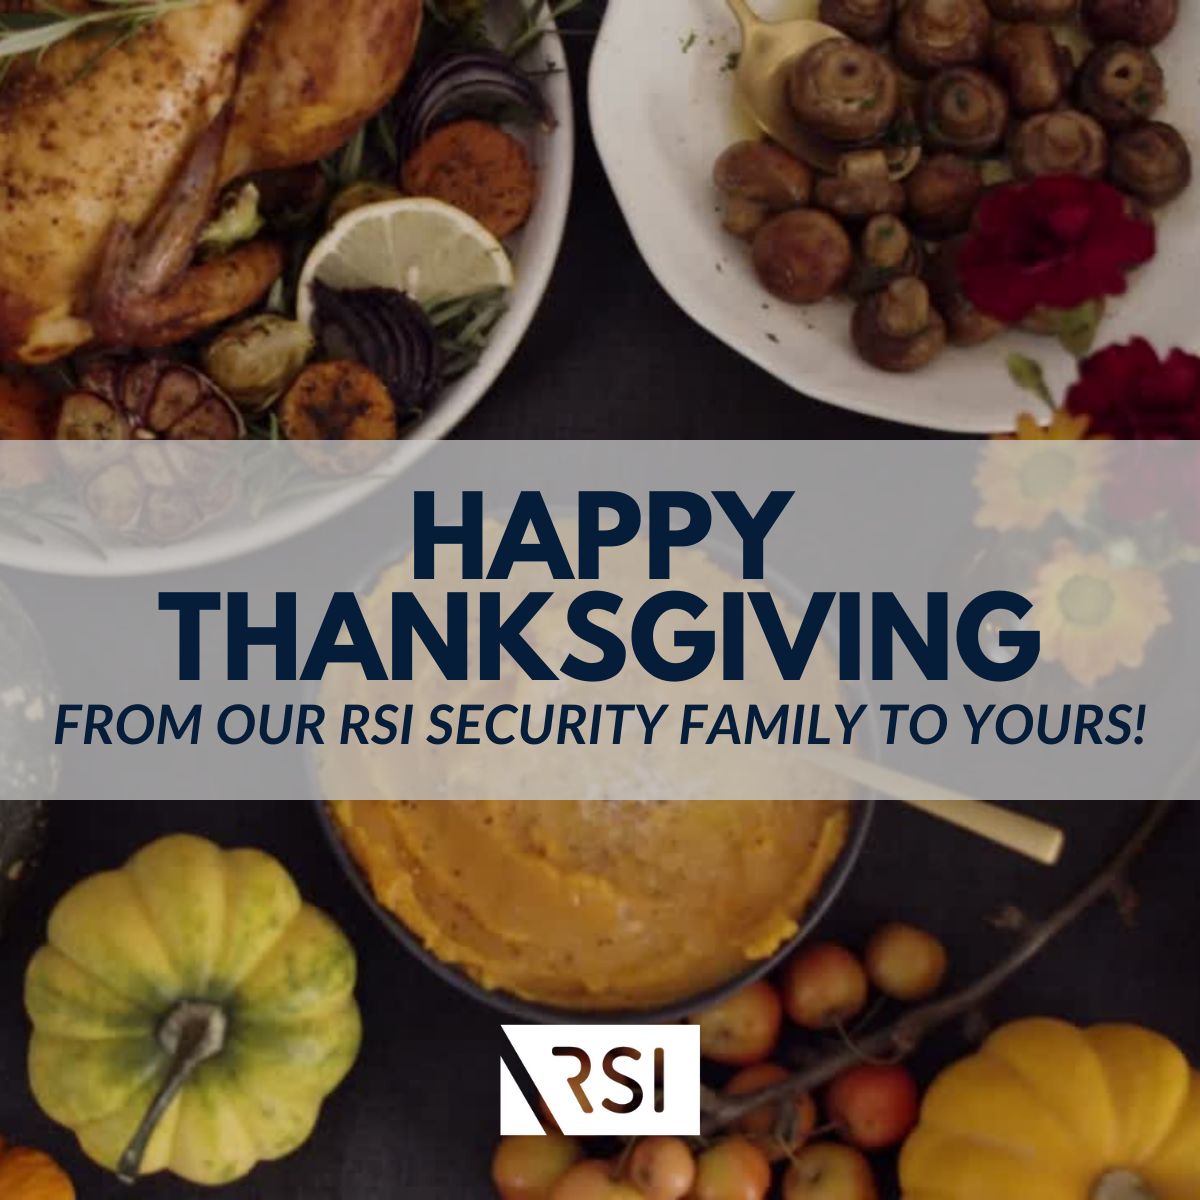 This Thanksgiving, RSI Security is serving up a cornucopia of gratitude to our incredible team, clients, and partners. Wishing everyone a hack-free holiday and a side of extra stuffing for all the hard work! #RSISecurityThanks #CybersecurityFeast